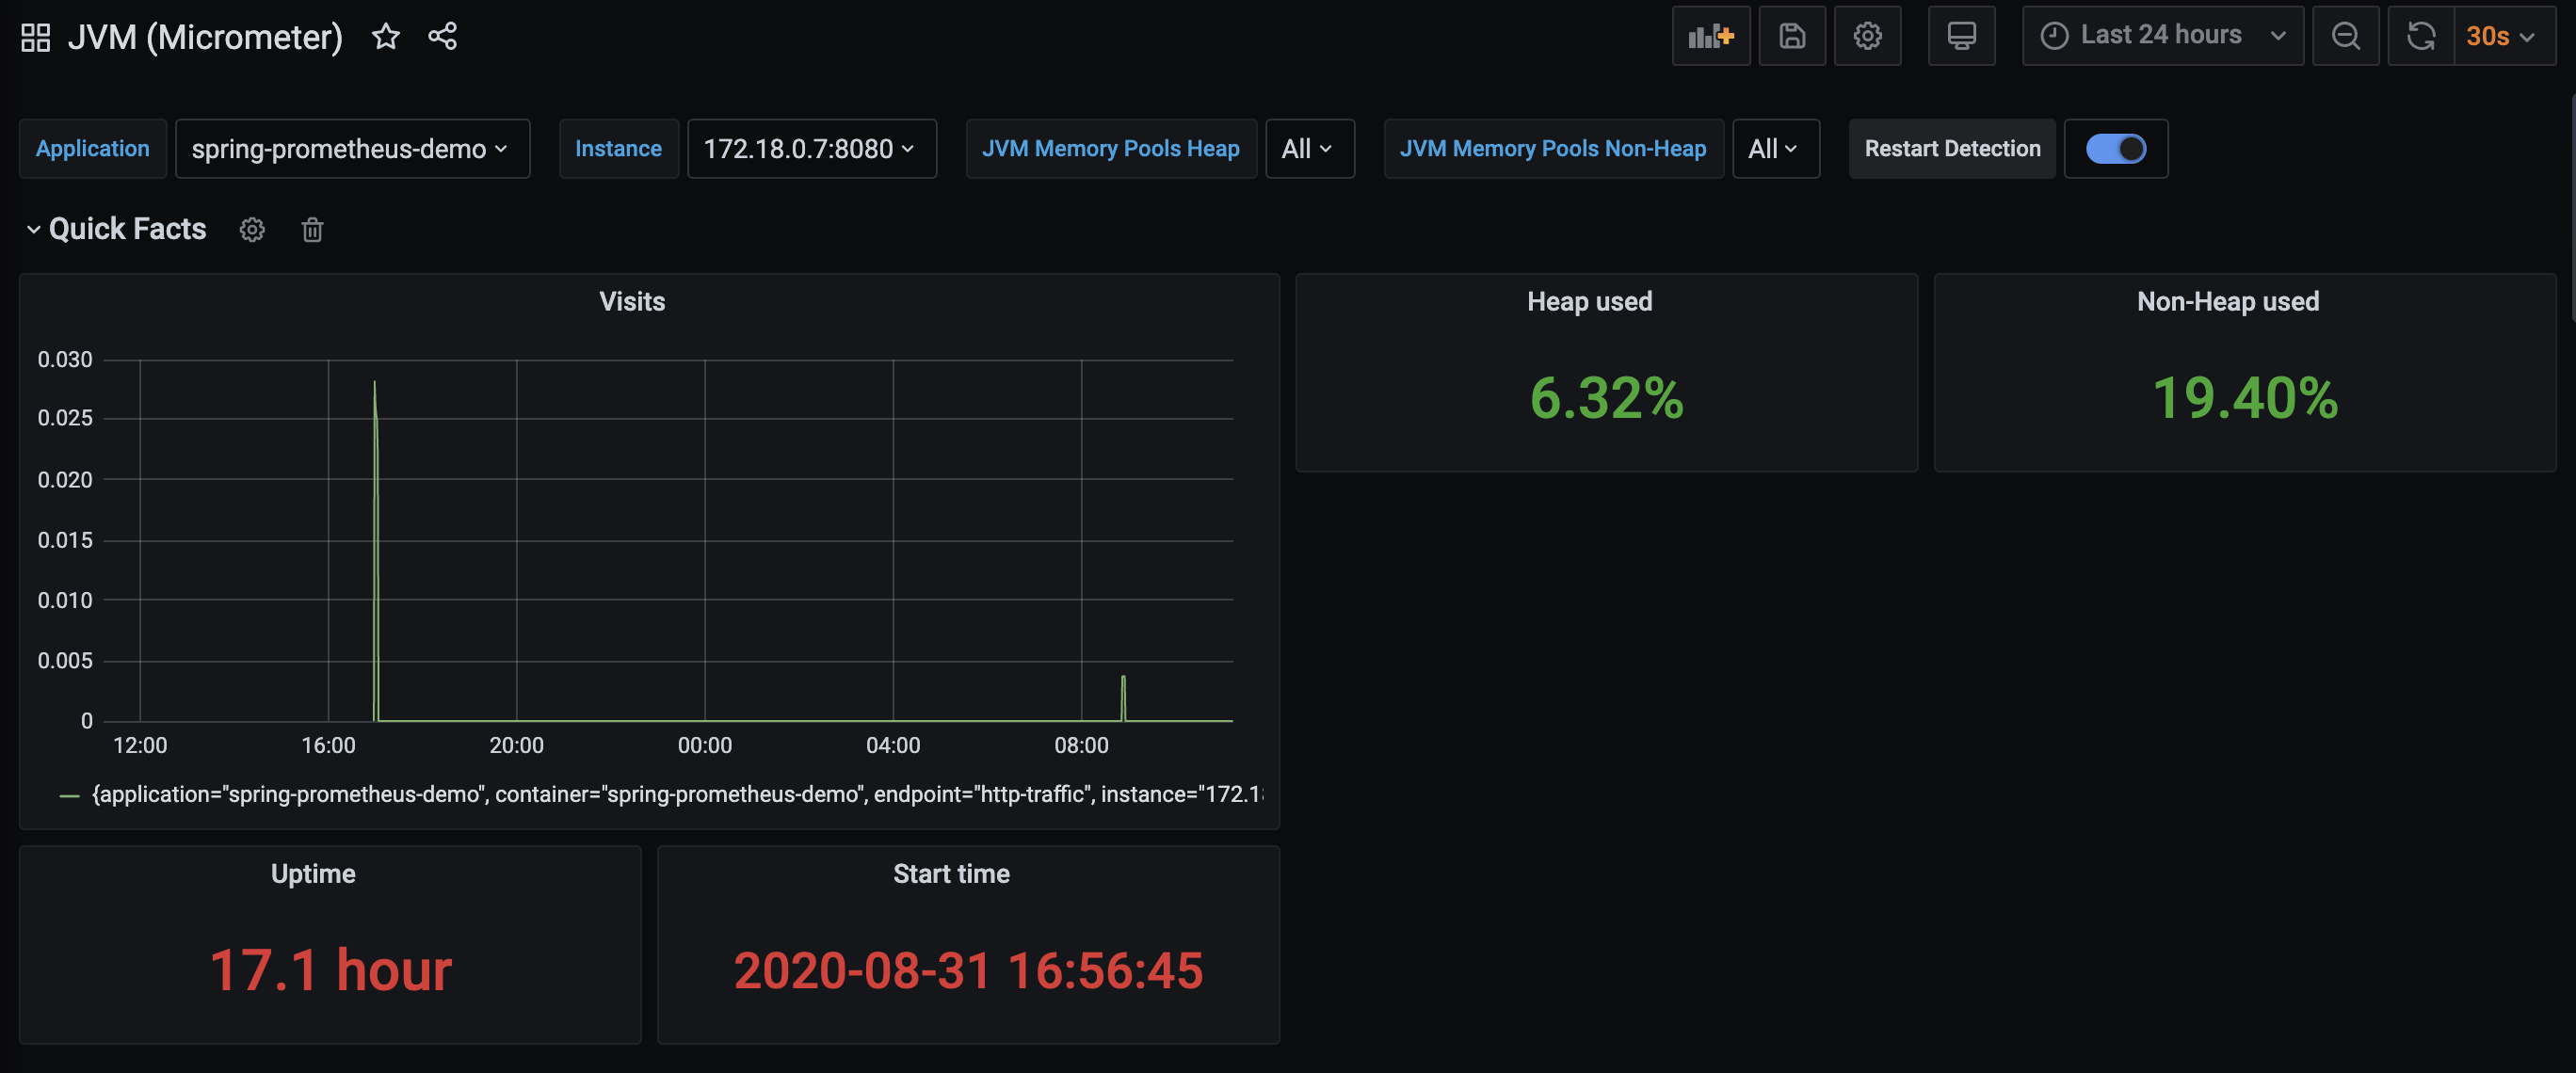 New panel added to the Grafana dashboard